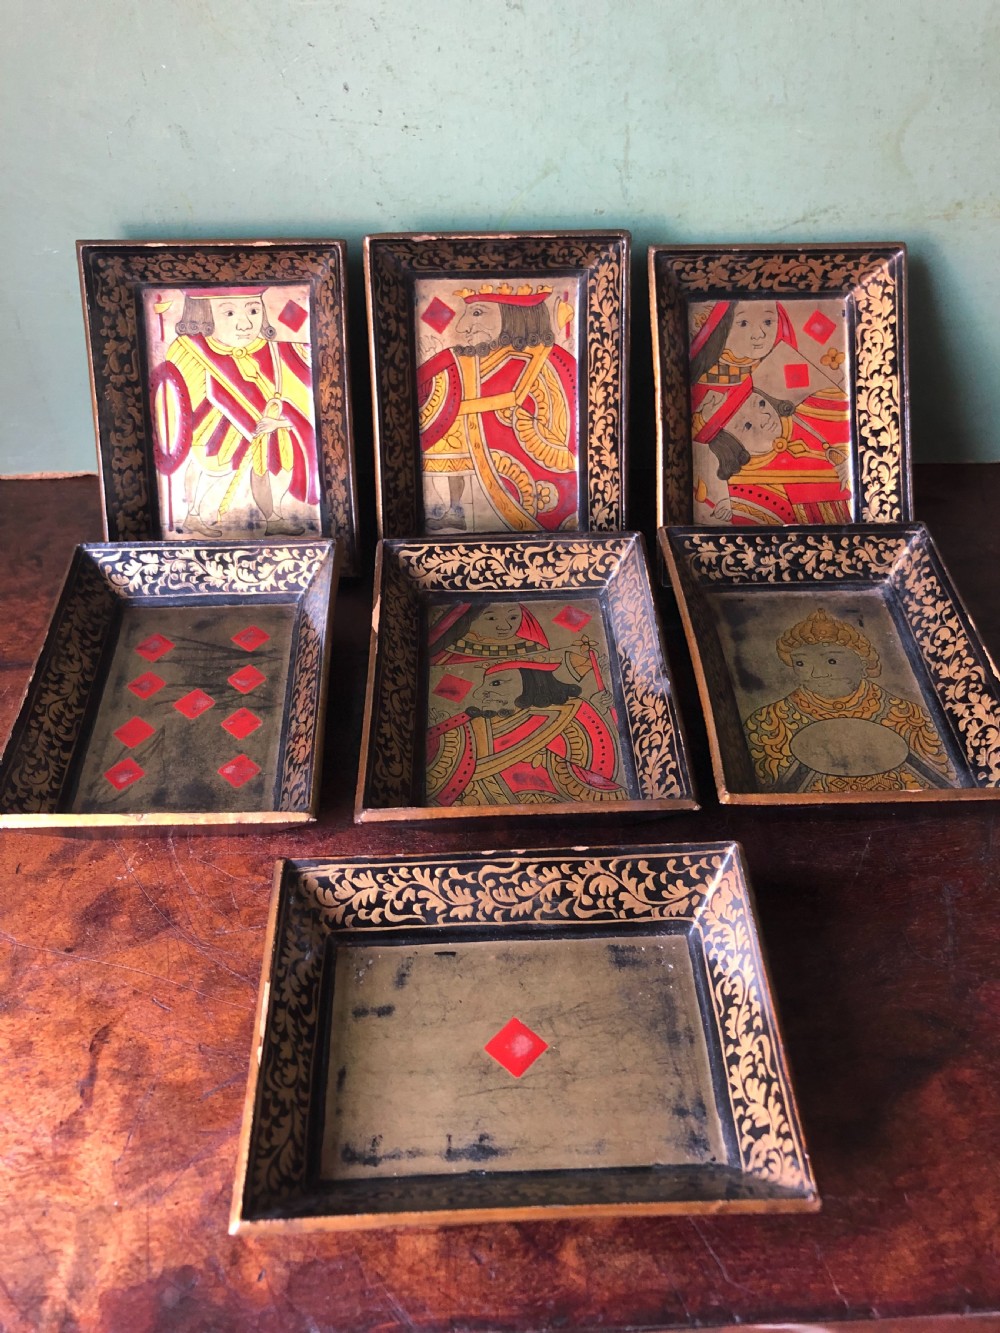 interesting and decorative set of 7 mid c19th chinese export lacquer miniature trays for holding gambling chips